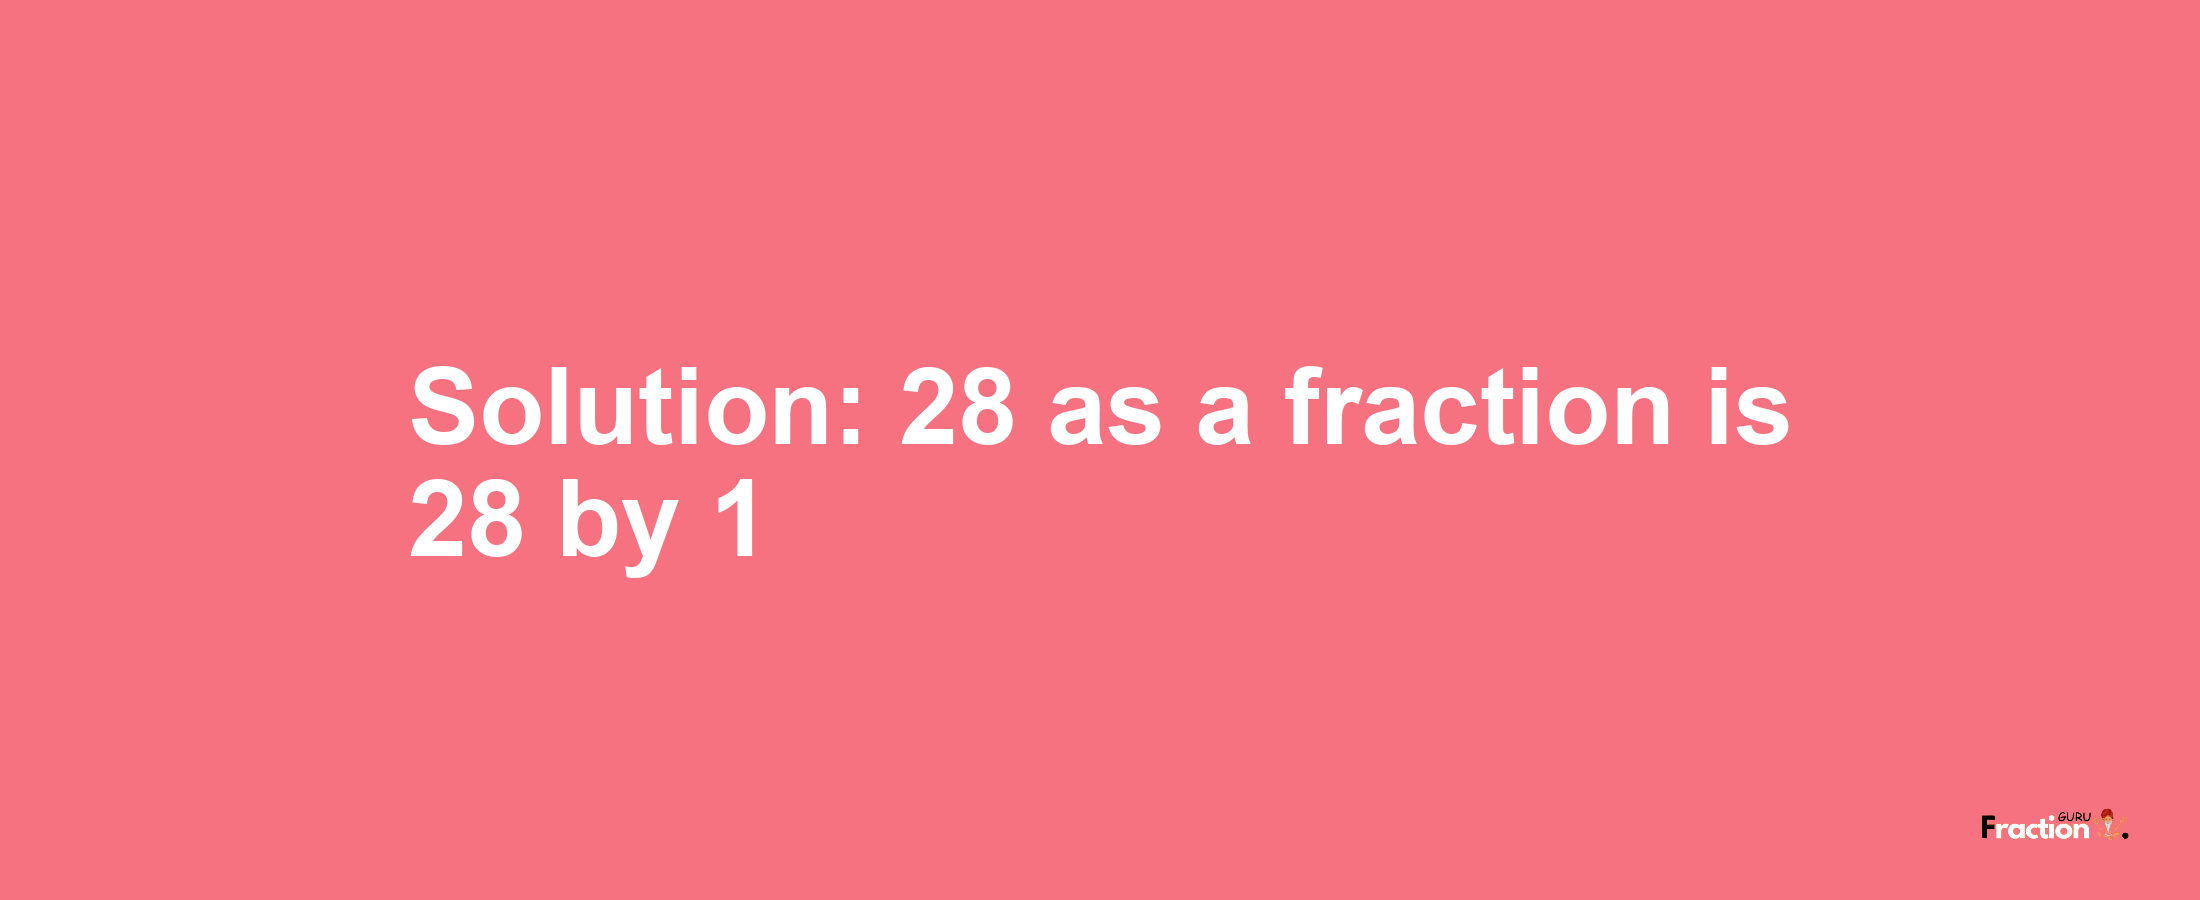 Solution:28 as a fraction is 28/1